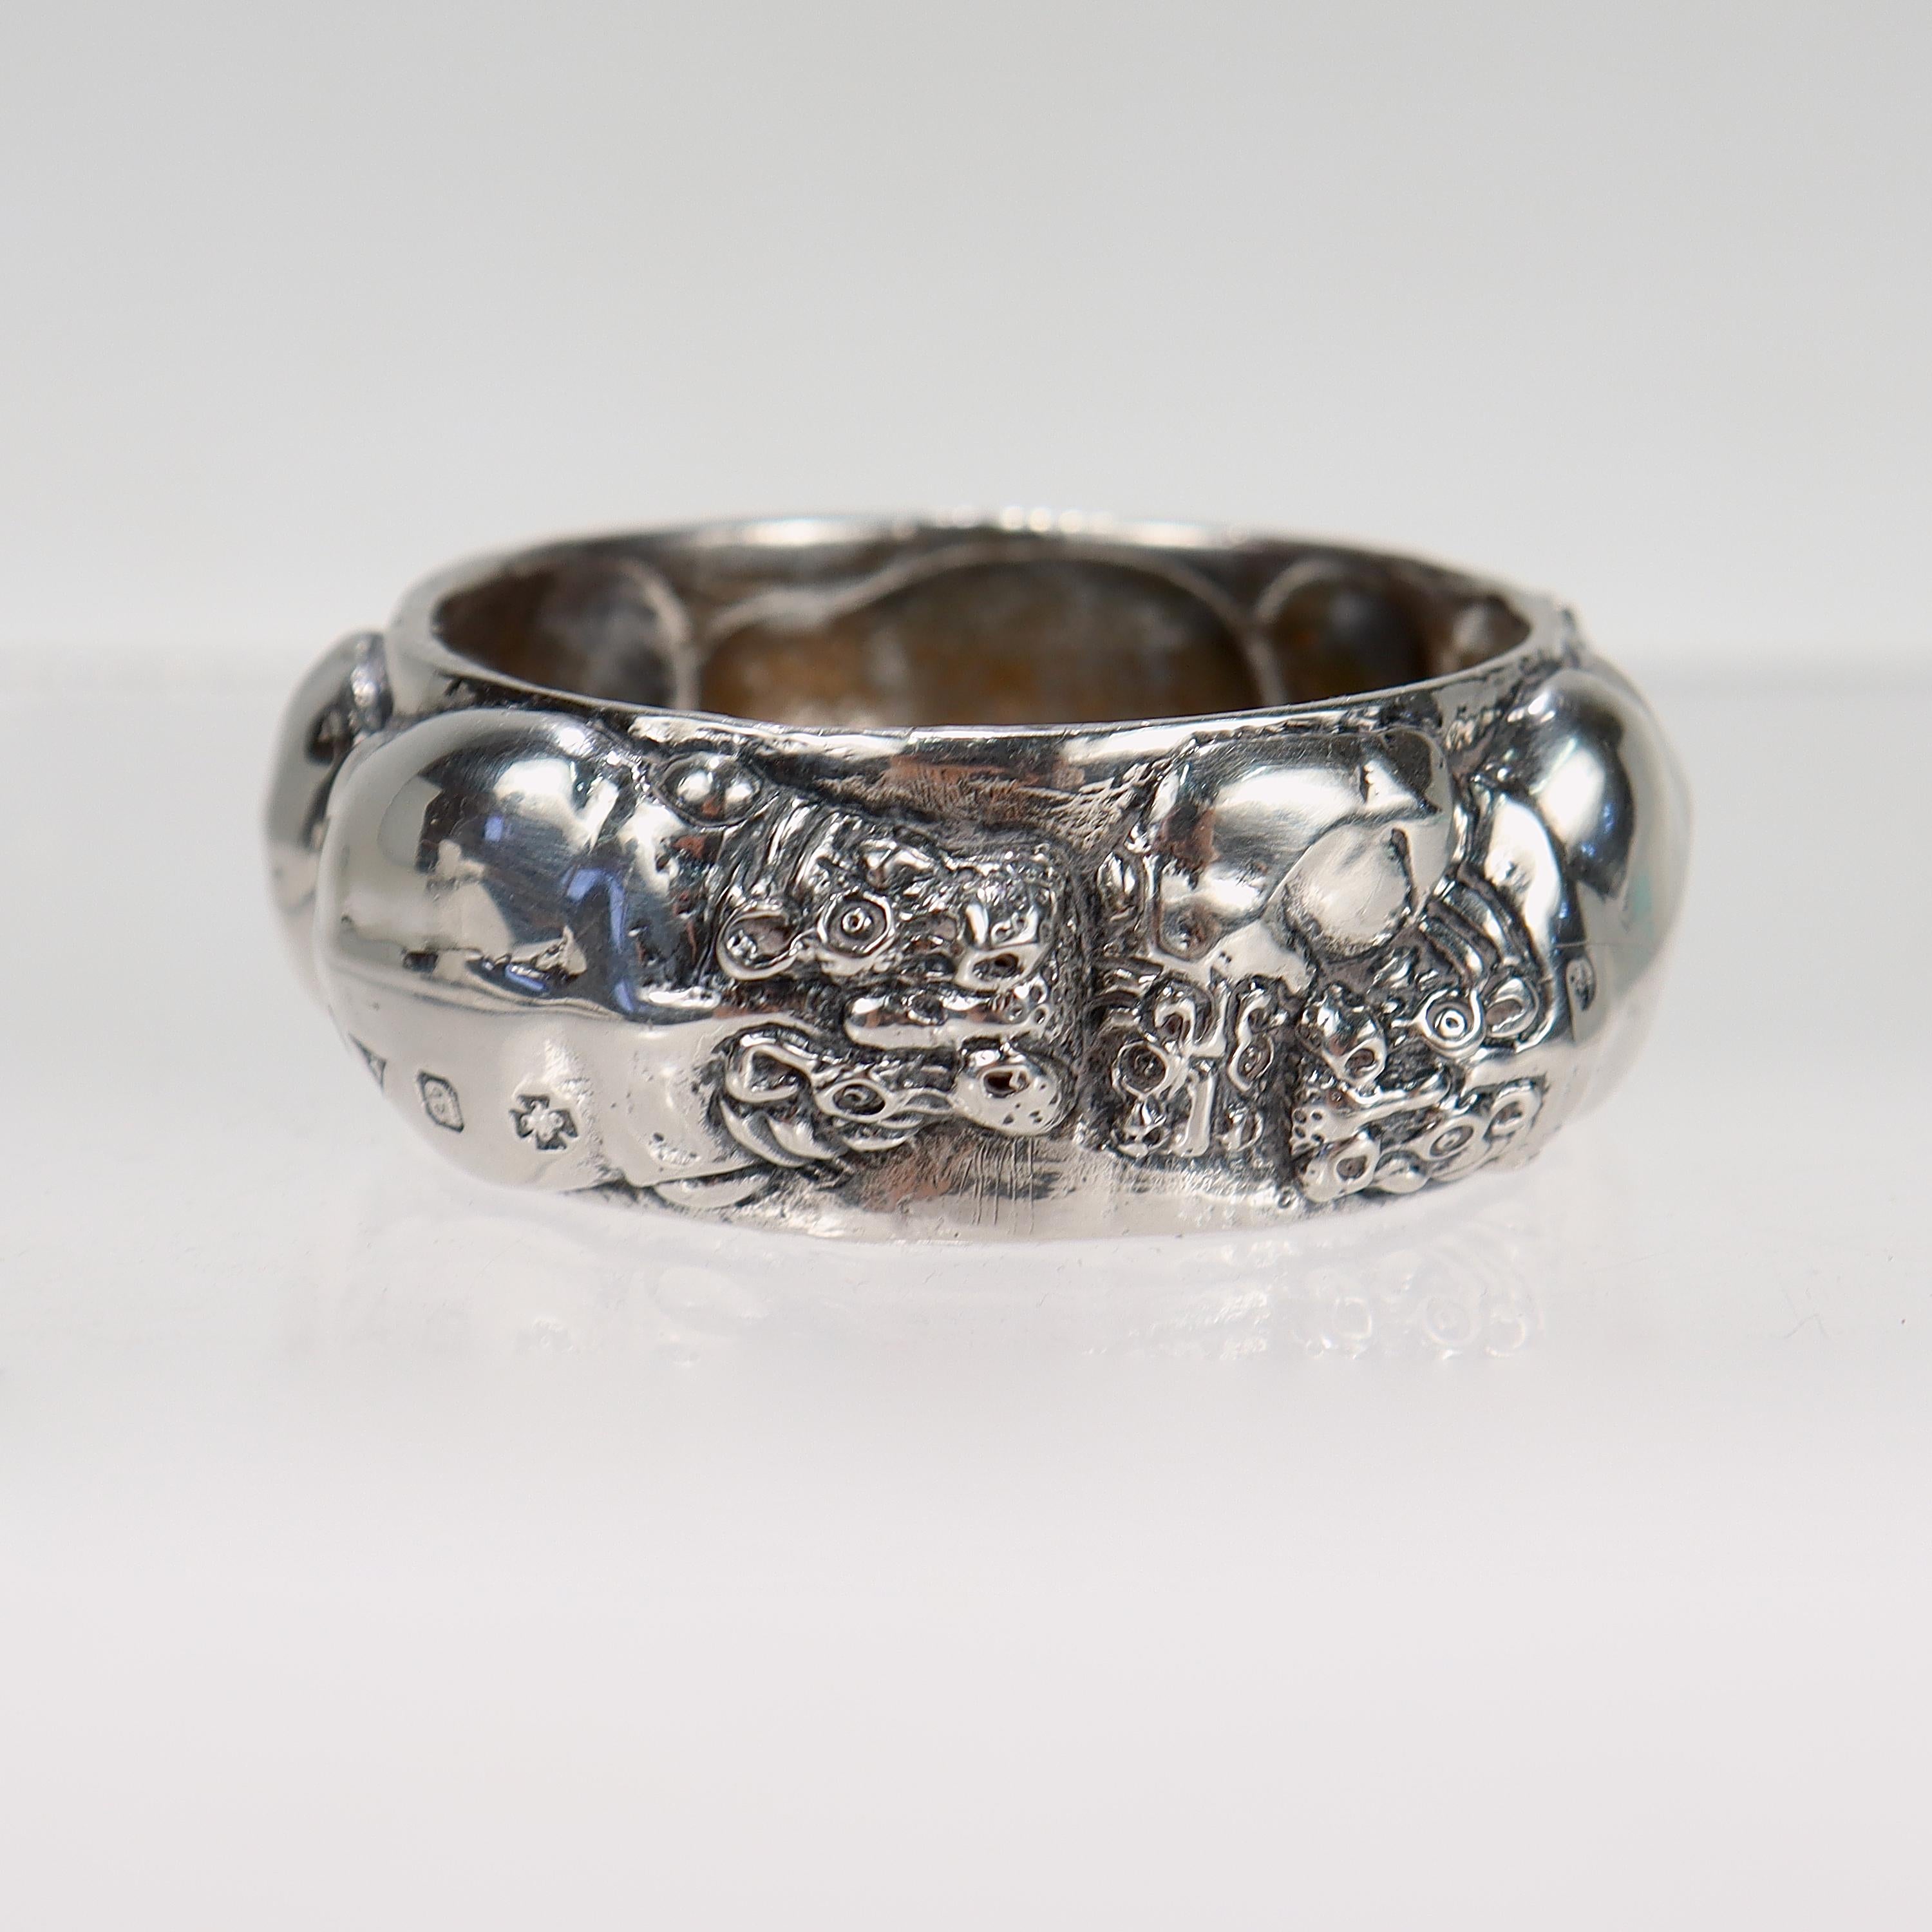 A fine Zimbabwean napkin ring.

In sterling silver.

By Patrick Mavros, the Zimbabwean luxury jewelry maker. 

With figural hippopotamuses around the circumference.

Simply a great Savannah-inspired silver napkin ring!

Date:
Late 20th or Early 21st